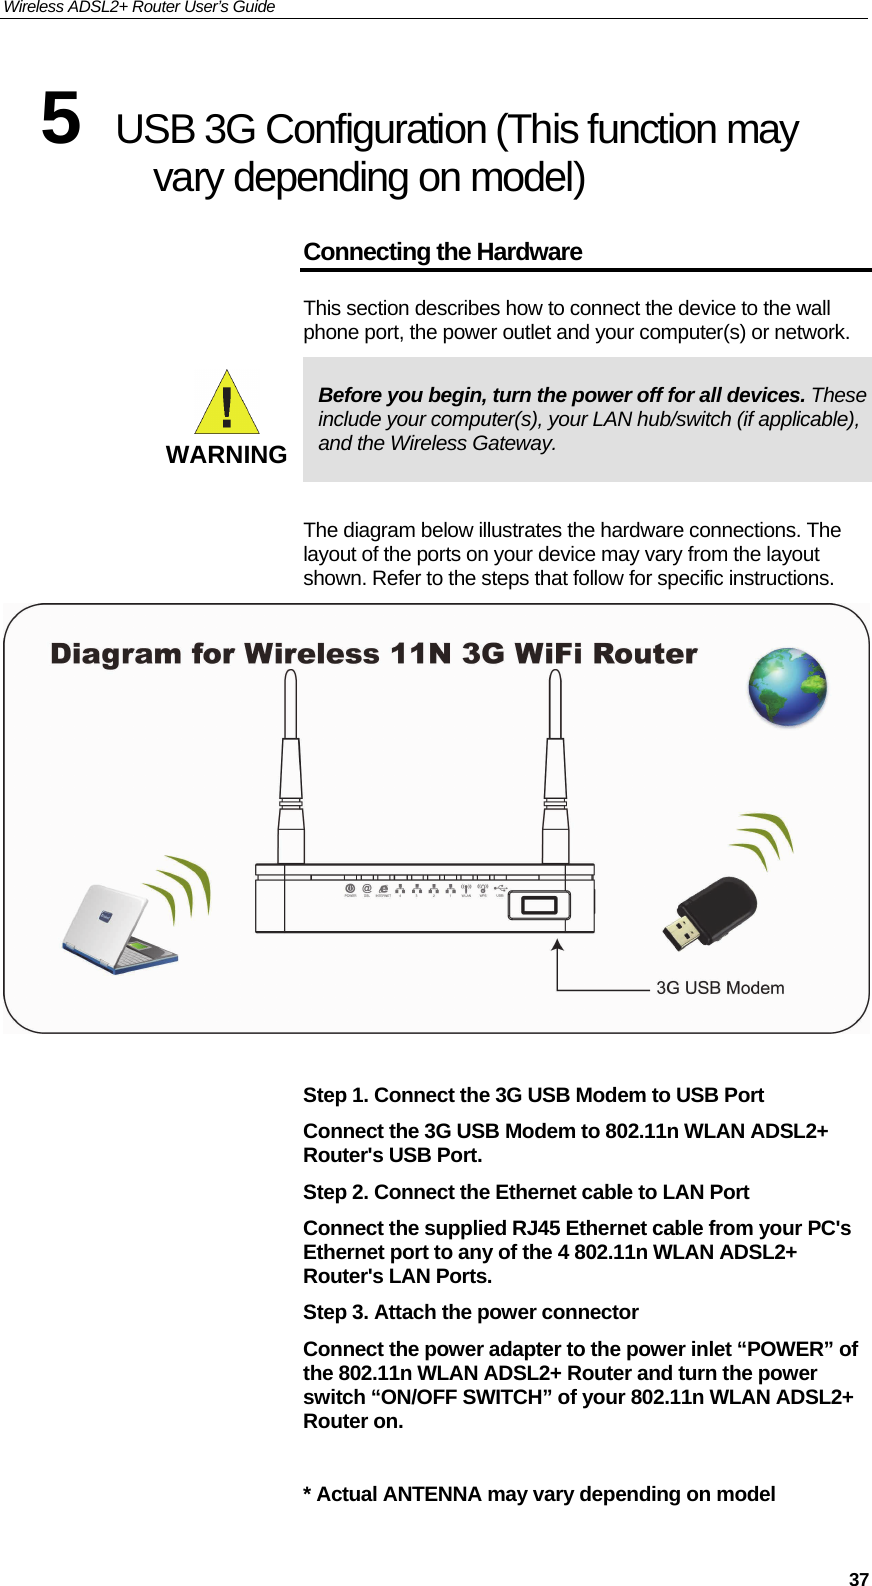 Wireless ADSL2+ Router User’s Guide     375  USB 3G Configuration (This function may vary depending on model)  Connecting the Hardware This section describes how to connect the device to the wall phone port, the power outlet and your computer(s) or network.  WARNING Before you begin, turn the power off for all devices. These include your computer(s), your LAN hub/switch (if applicable), and the Wireless Gateway.  The diagram below illustrates the hardware connections. The layout of the ports on your device may vary from the layout shown. Refer to the steps that follow for specific instructions.   Step 1. Connect the 3G USB Modem to USB Port Connect the 3G USB Modem to 802.11n WLAN ADSL2+ Router&apos;s USB Port. Step 2. Connect the Ethernet cable to LAN Port Connect the supplied RJ45 Ethernet cable from your PC&apos;s Ethernet port to any of the 4 802.11n WLAN ADSL2+ Router&apos;s LAN Ports. Step 3. Attach the power connector Connect the power adapter to the power inlet “POWER” of the 802.11n WLAN ADSL2+ Router and turn the power switch “ON/OFF SWITCH” of your 802.11n WLAN ADSL2+ Router on.  * Actual ANTENNA may vary depending on model 